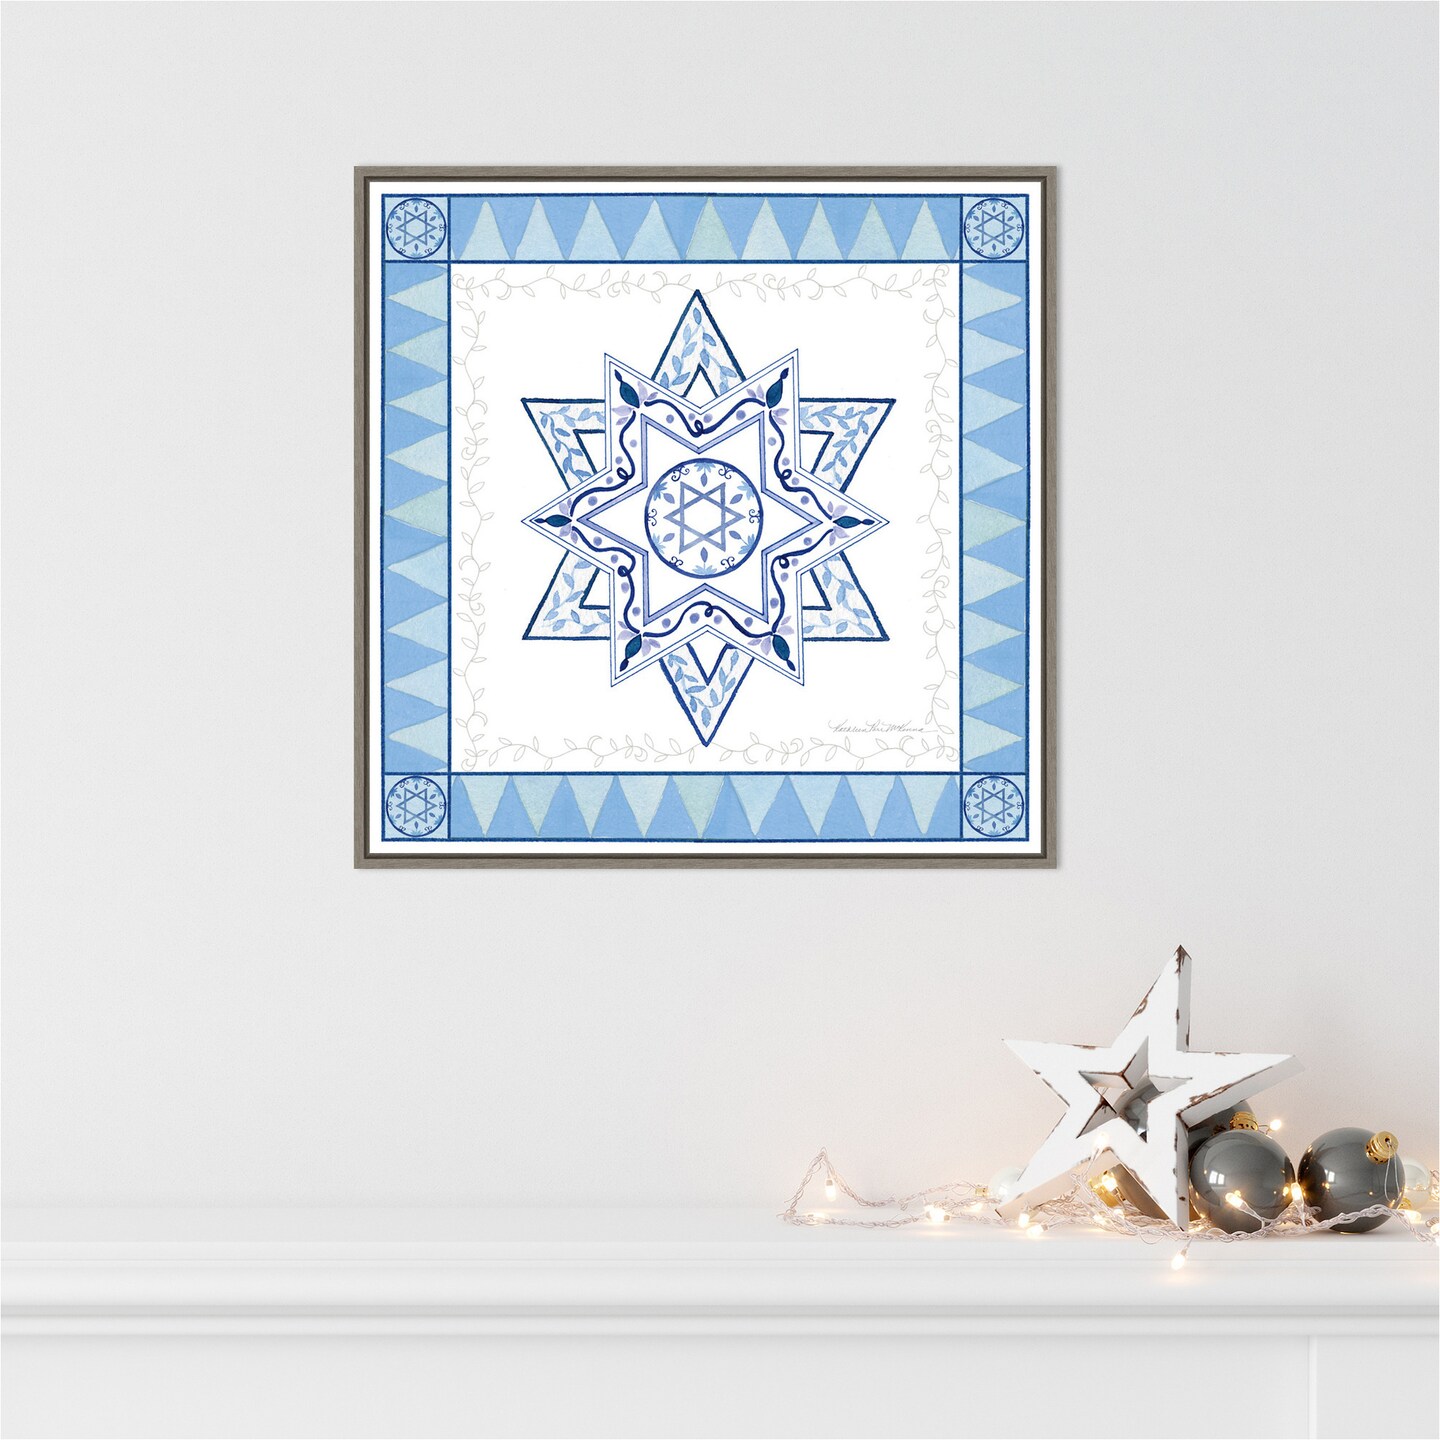 Celebrating Hanukkah I by Kathleen Parr McKenna 22-in. W x 22-in. H. Canvas Wall Art Print Framed in Grey